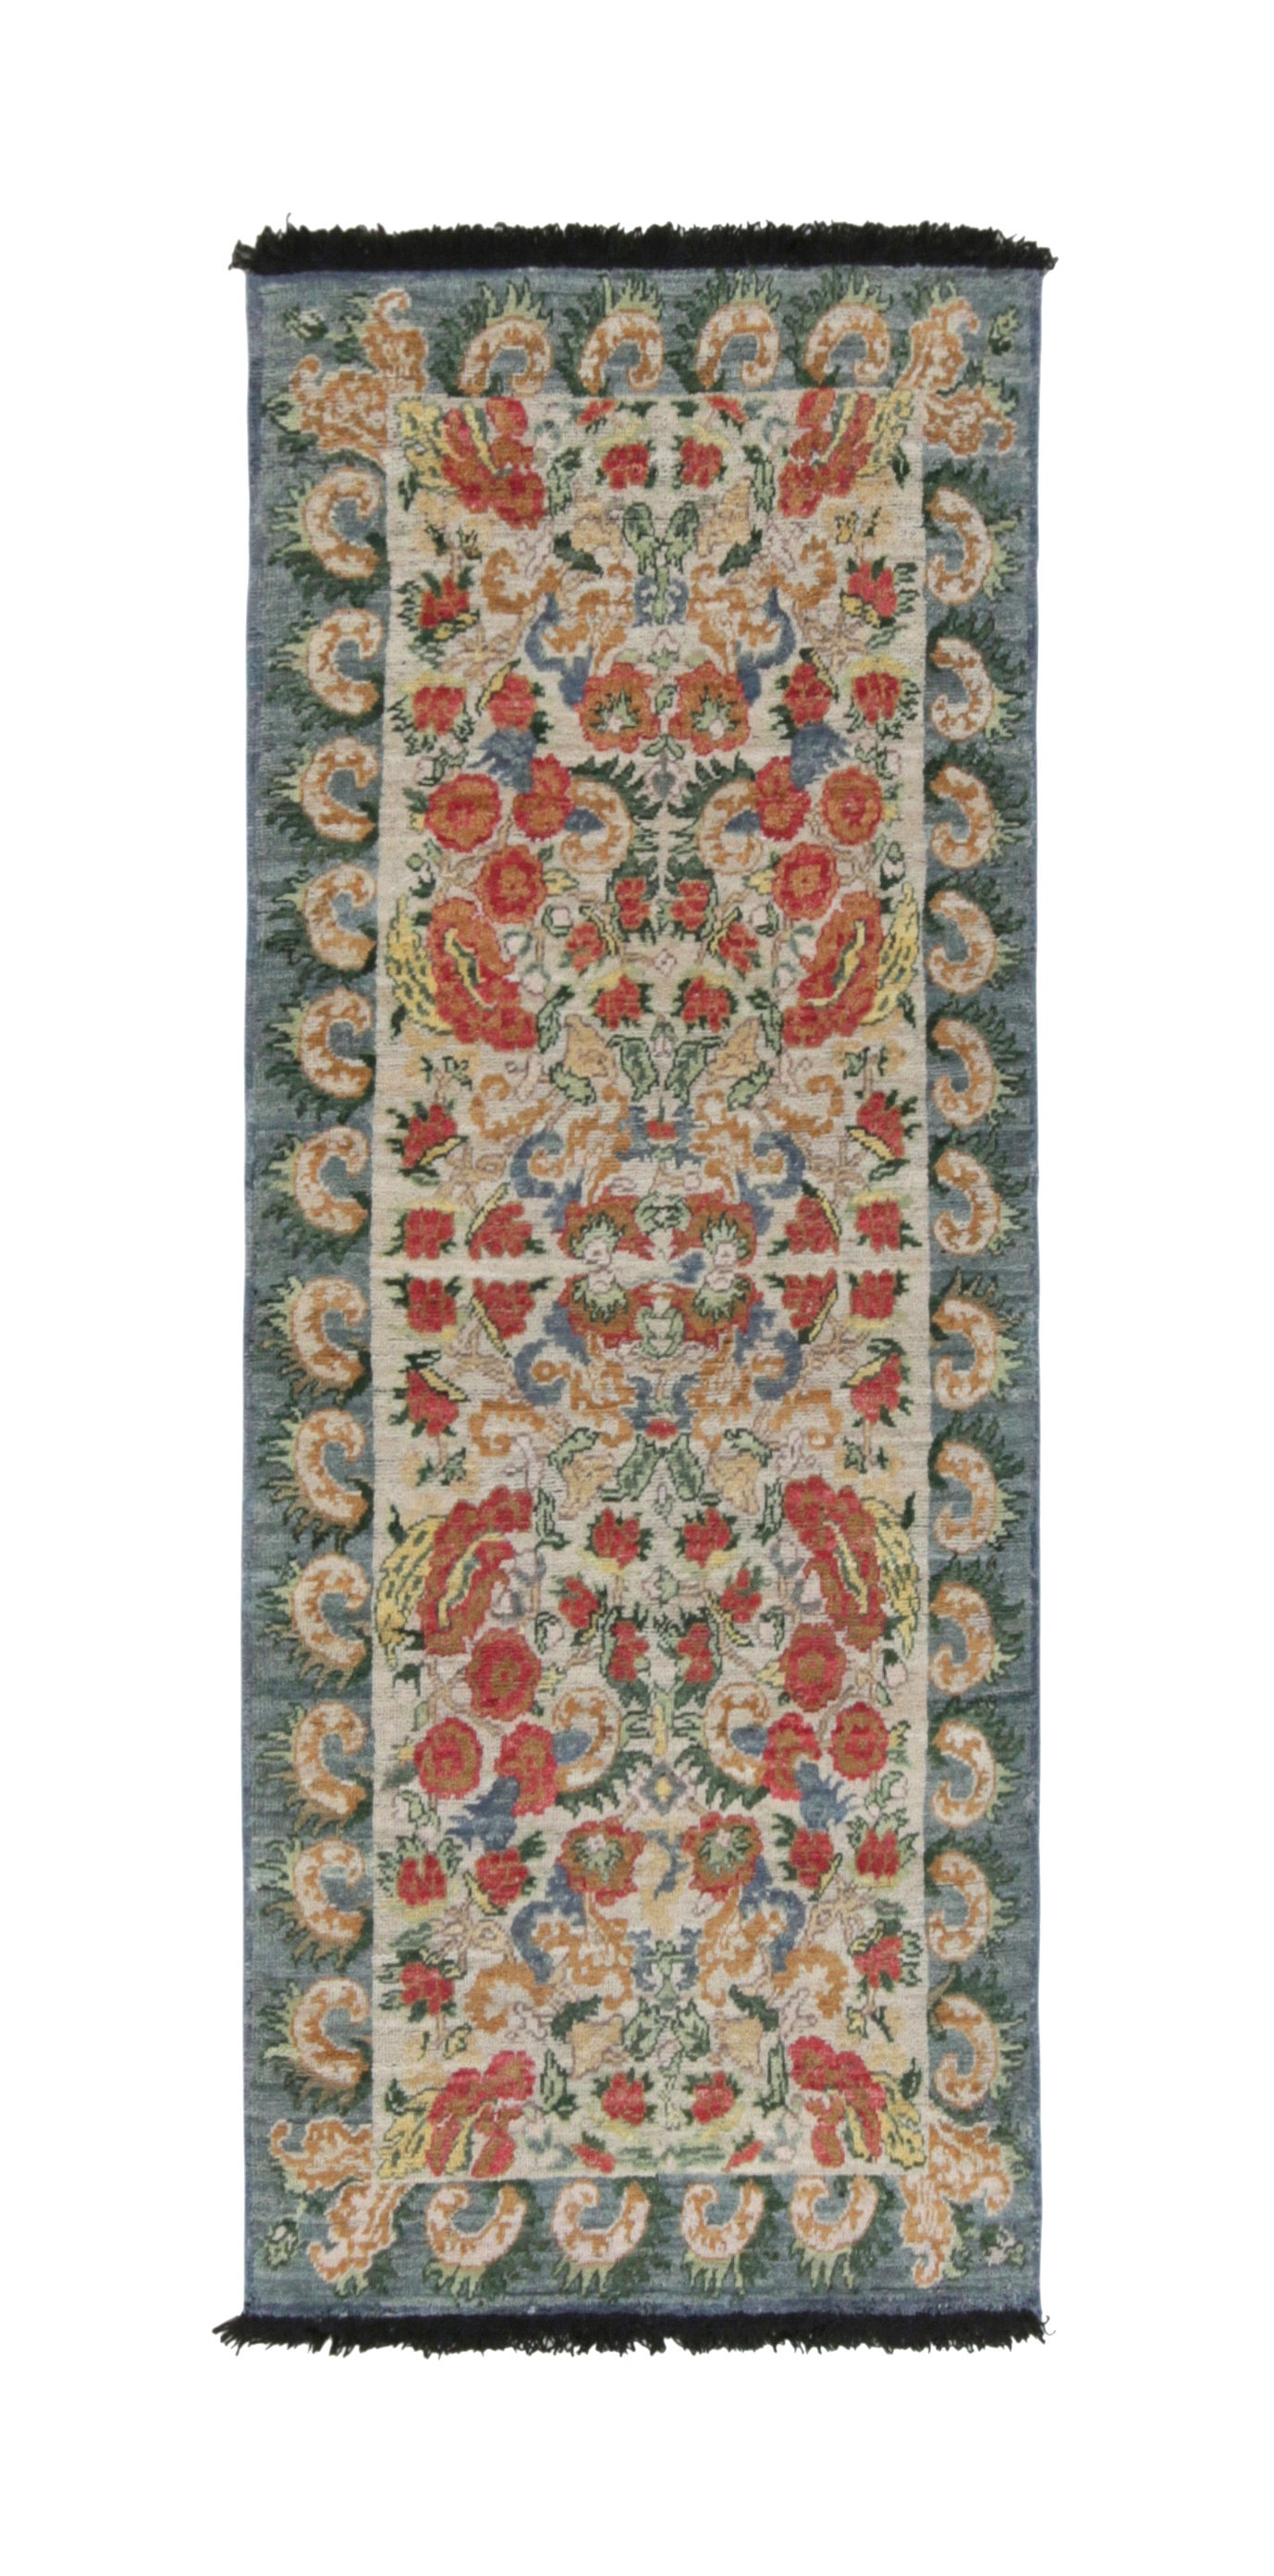 Rug & Kilim’s Classic Style Runner in Red Floral Patterns on Off-White